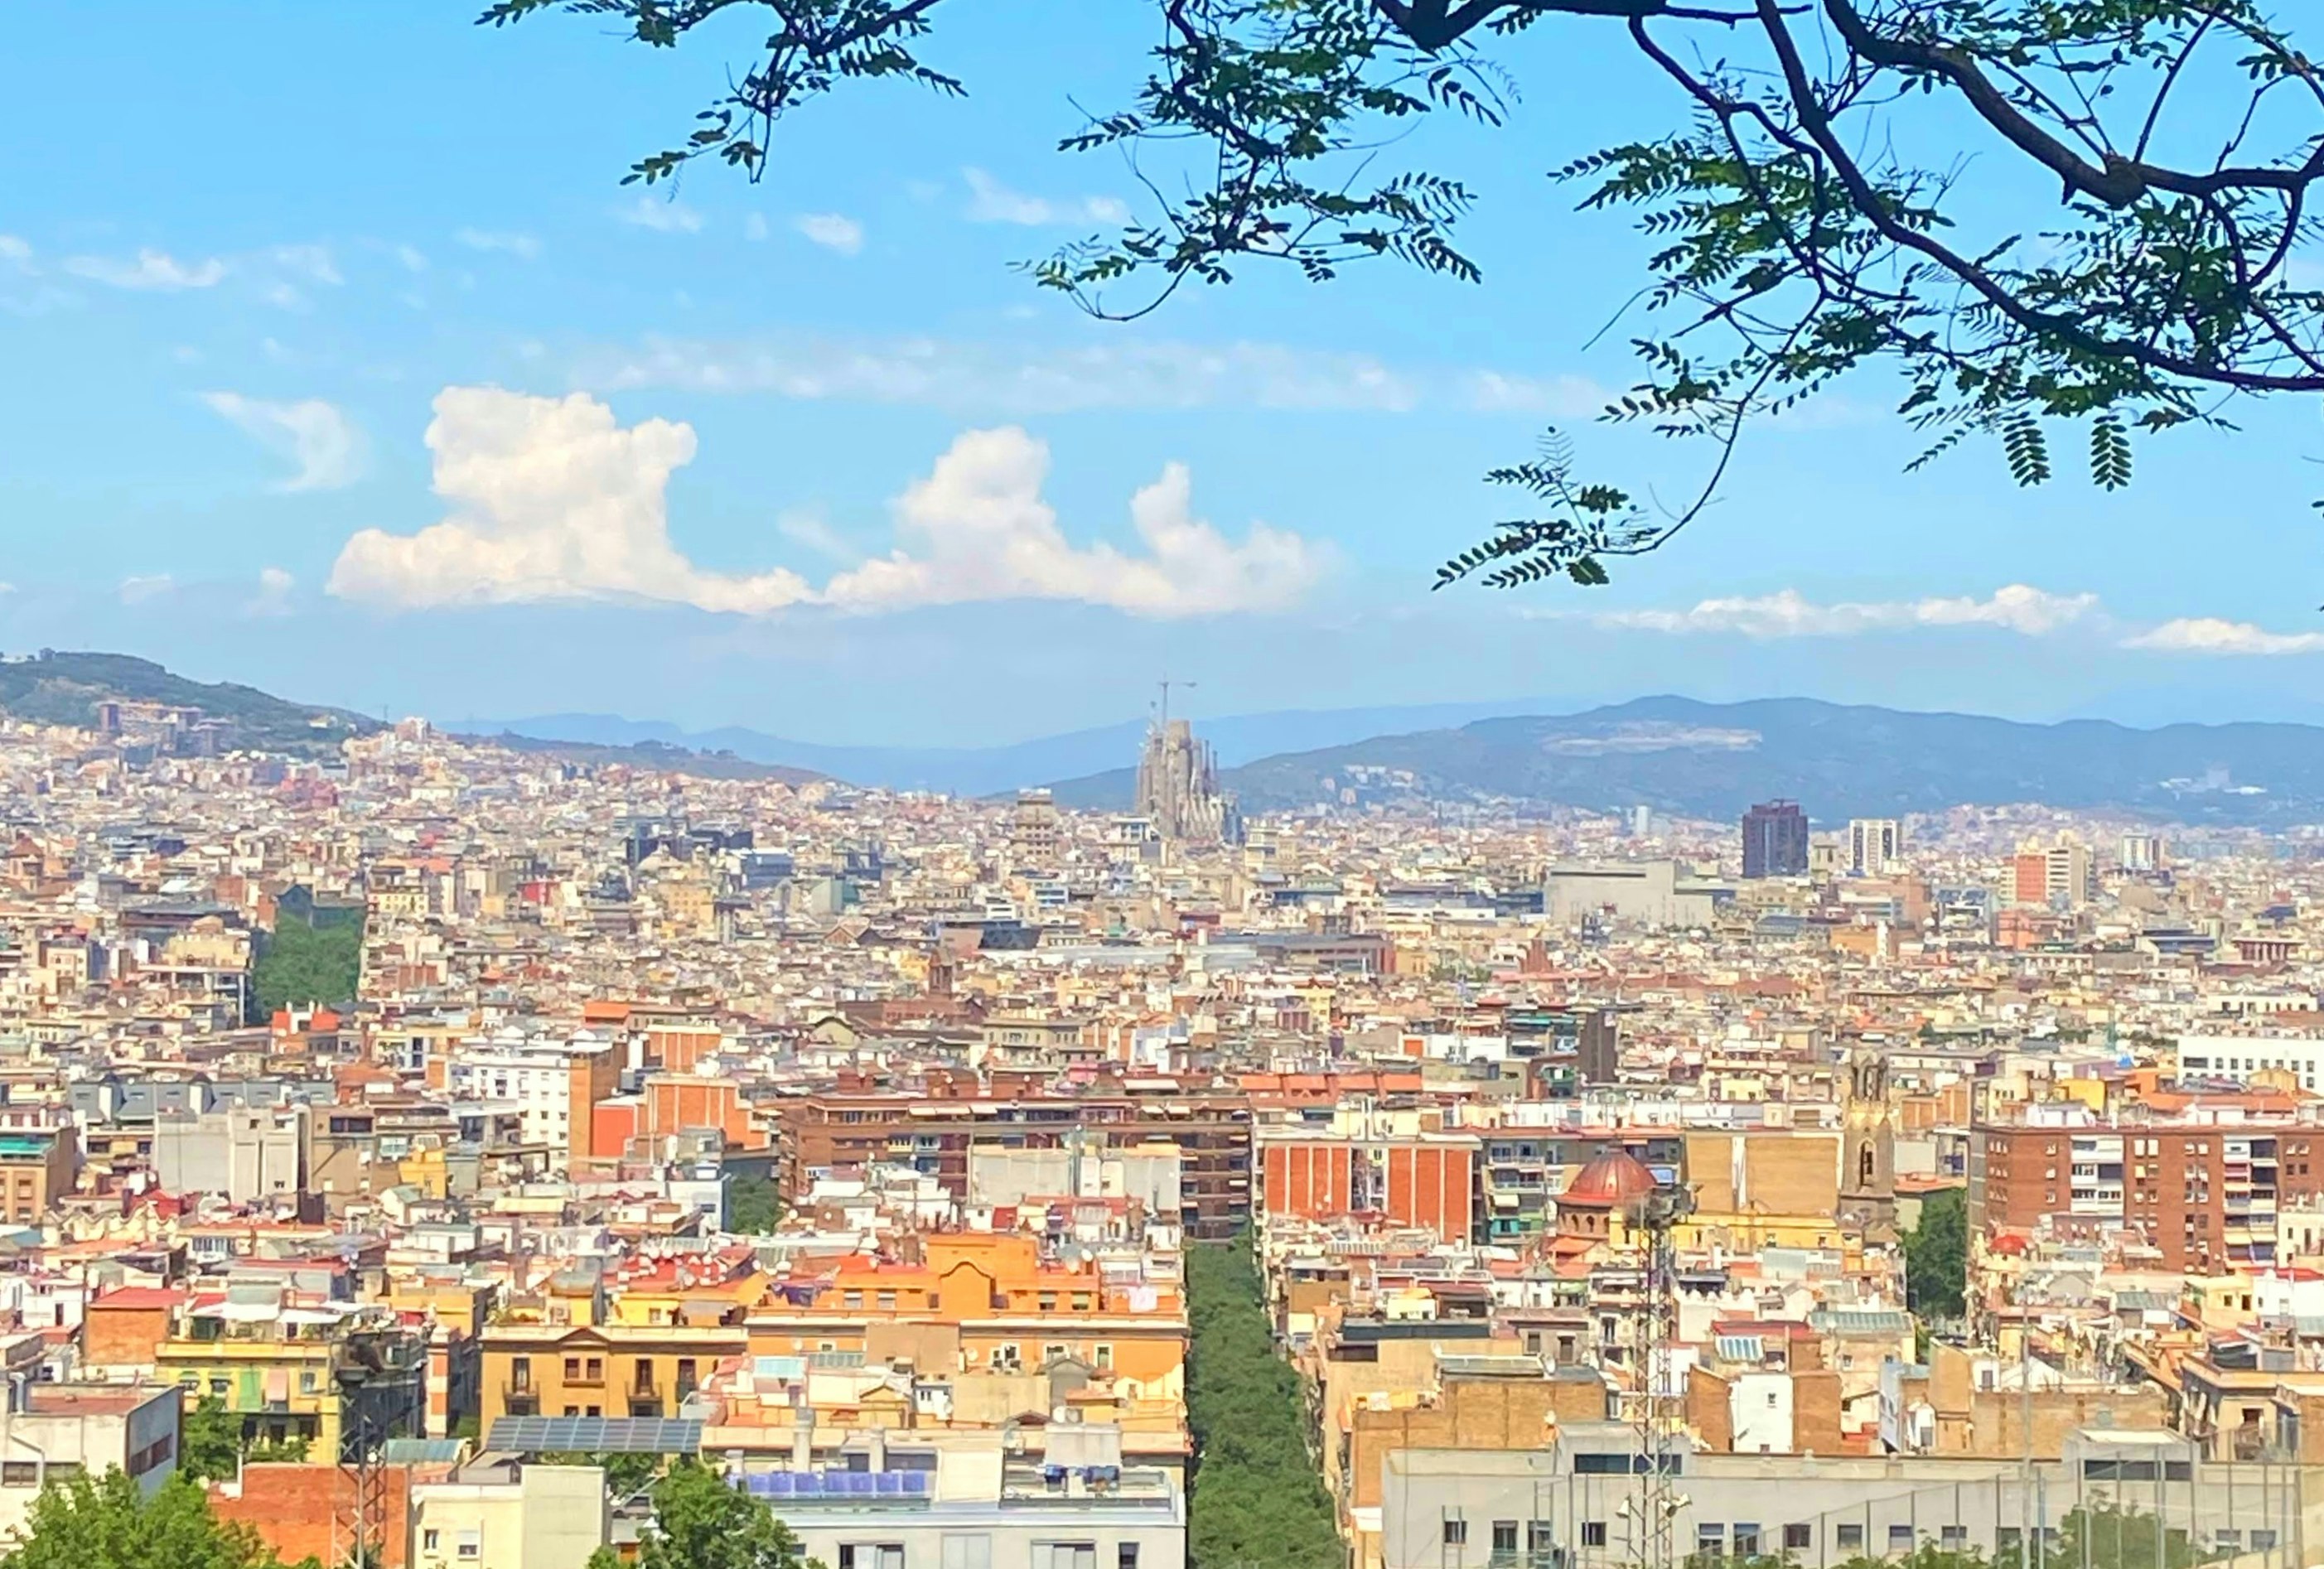 Aerial view of Barcelona from Montjuic